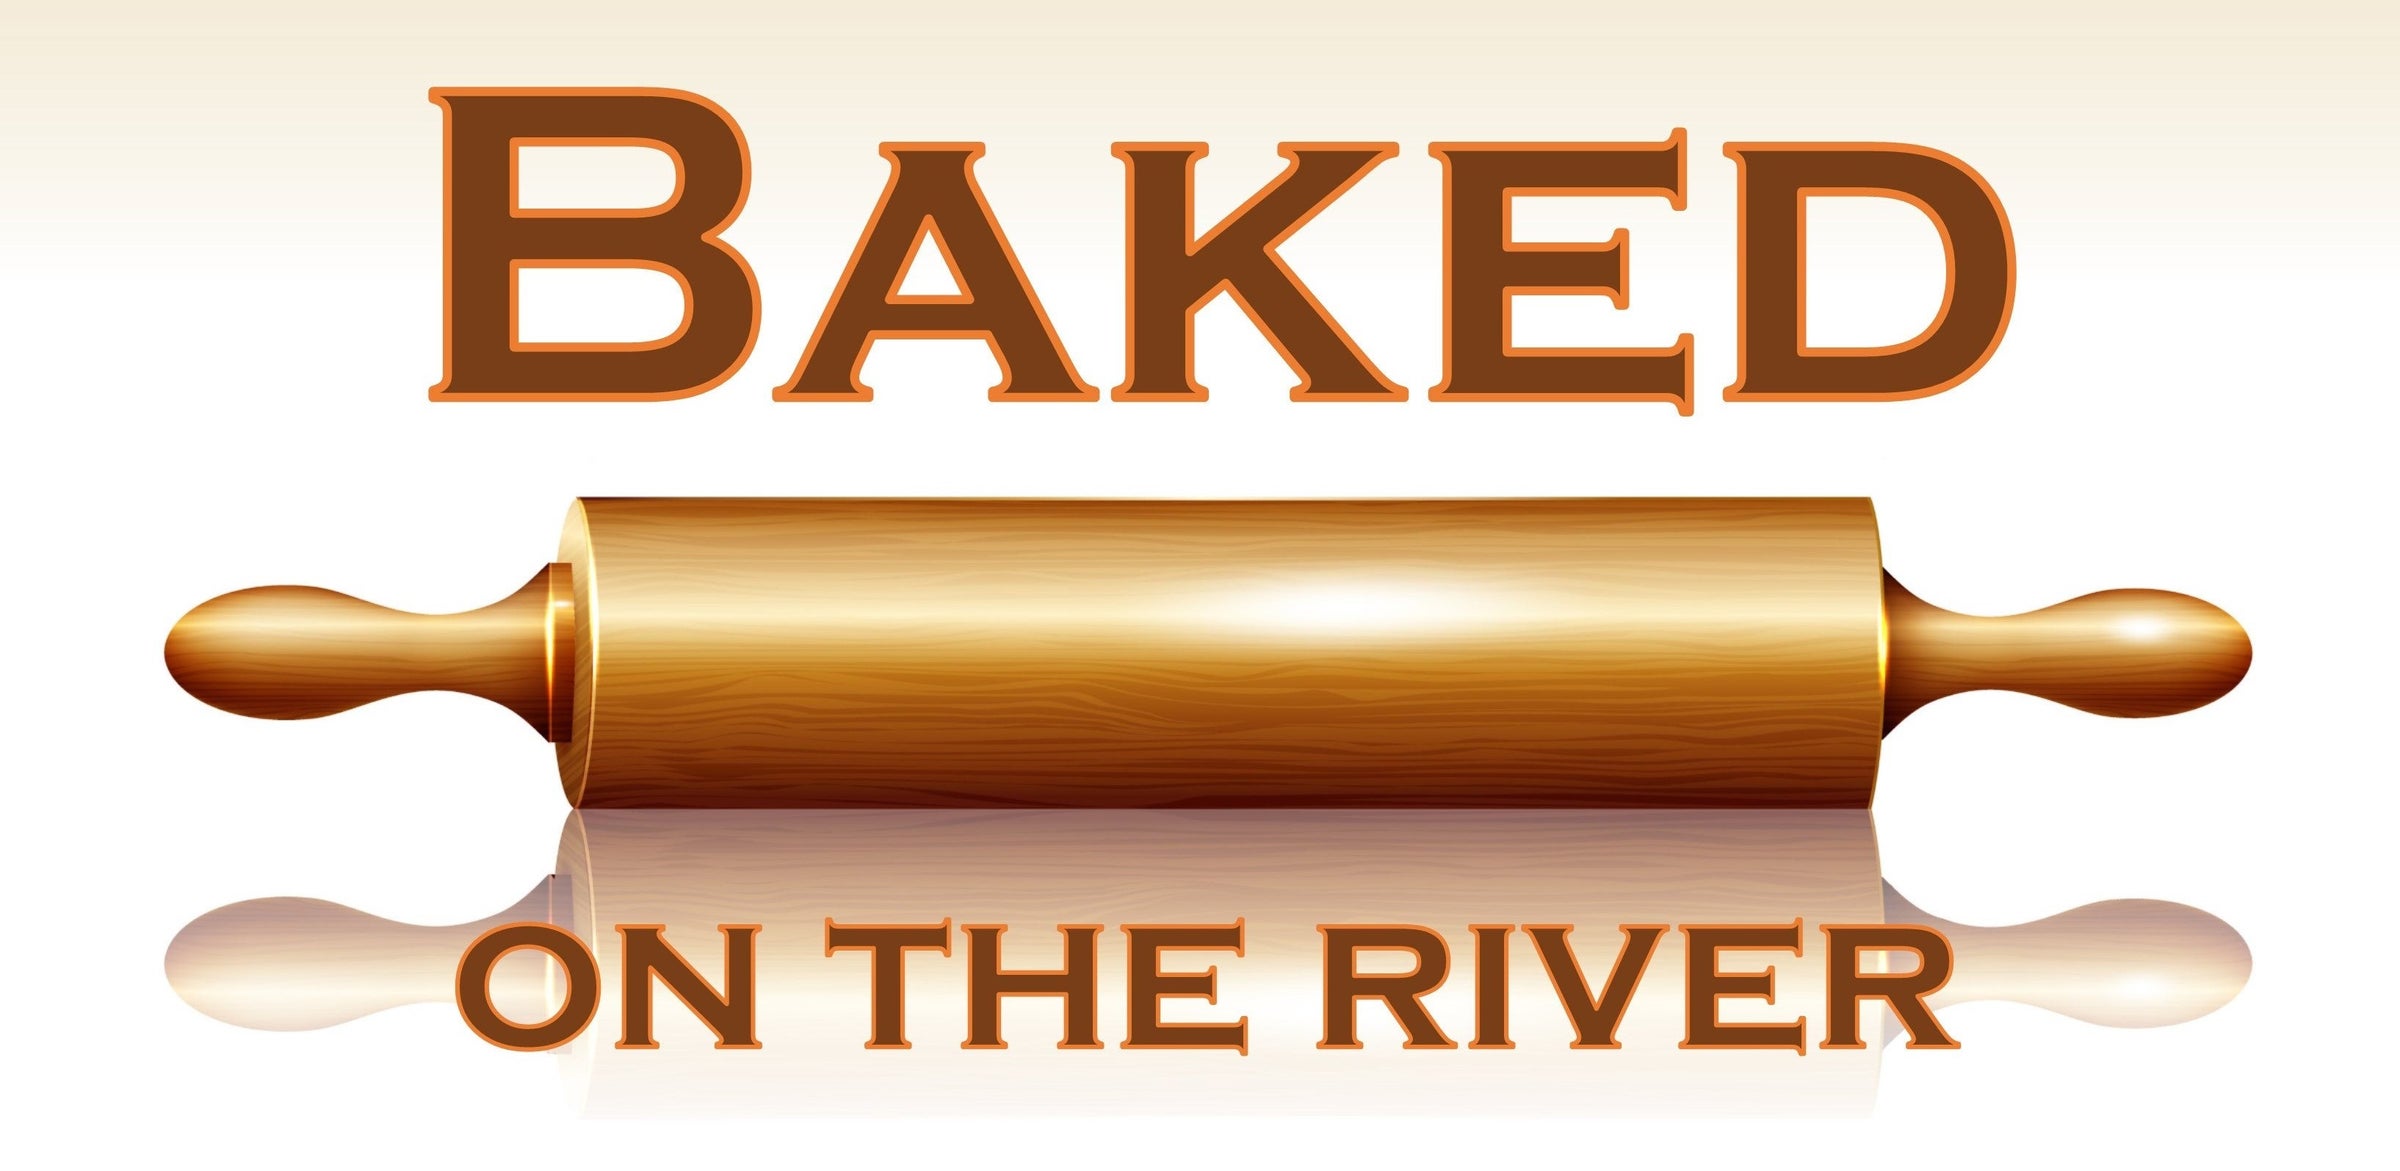 Baked on the River logo